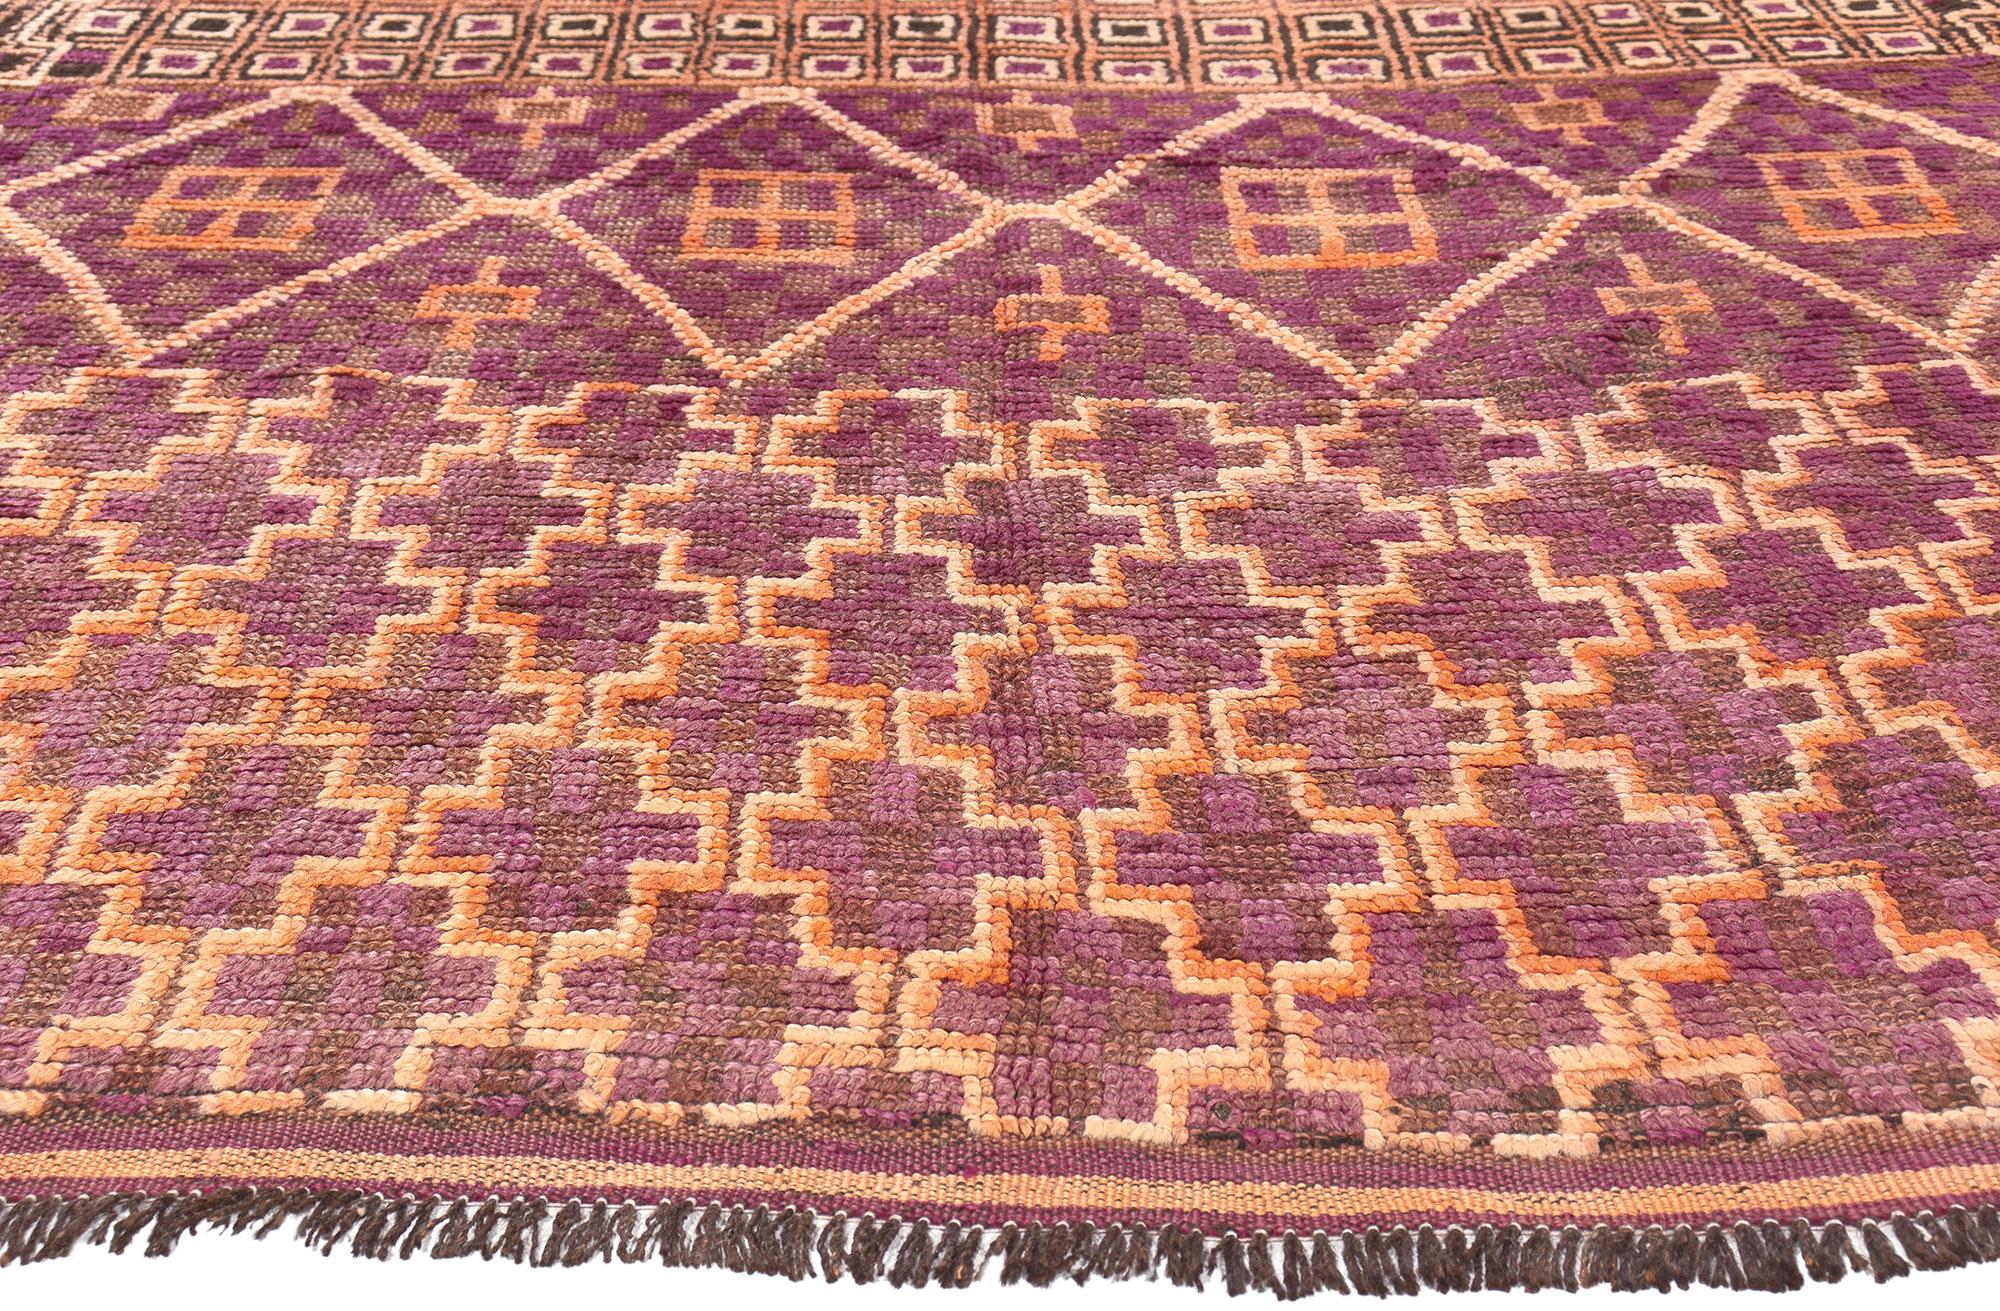 Vintage Beni MGuild Moroccan Rug, Bohemian Rhapsody Meets Midcentury Modern In Good Condition For Sale In Dallas, TX